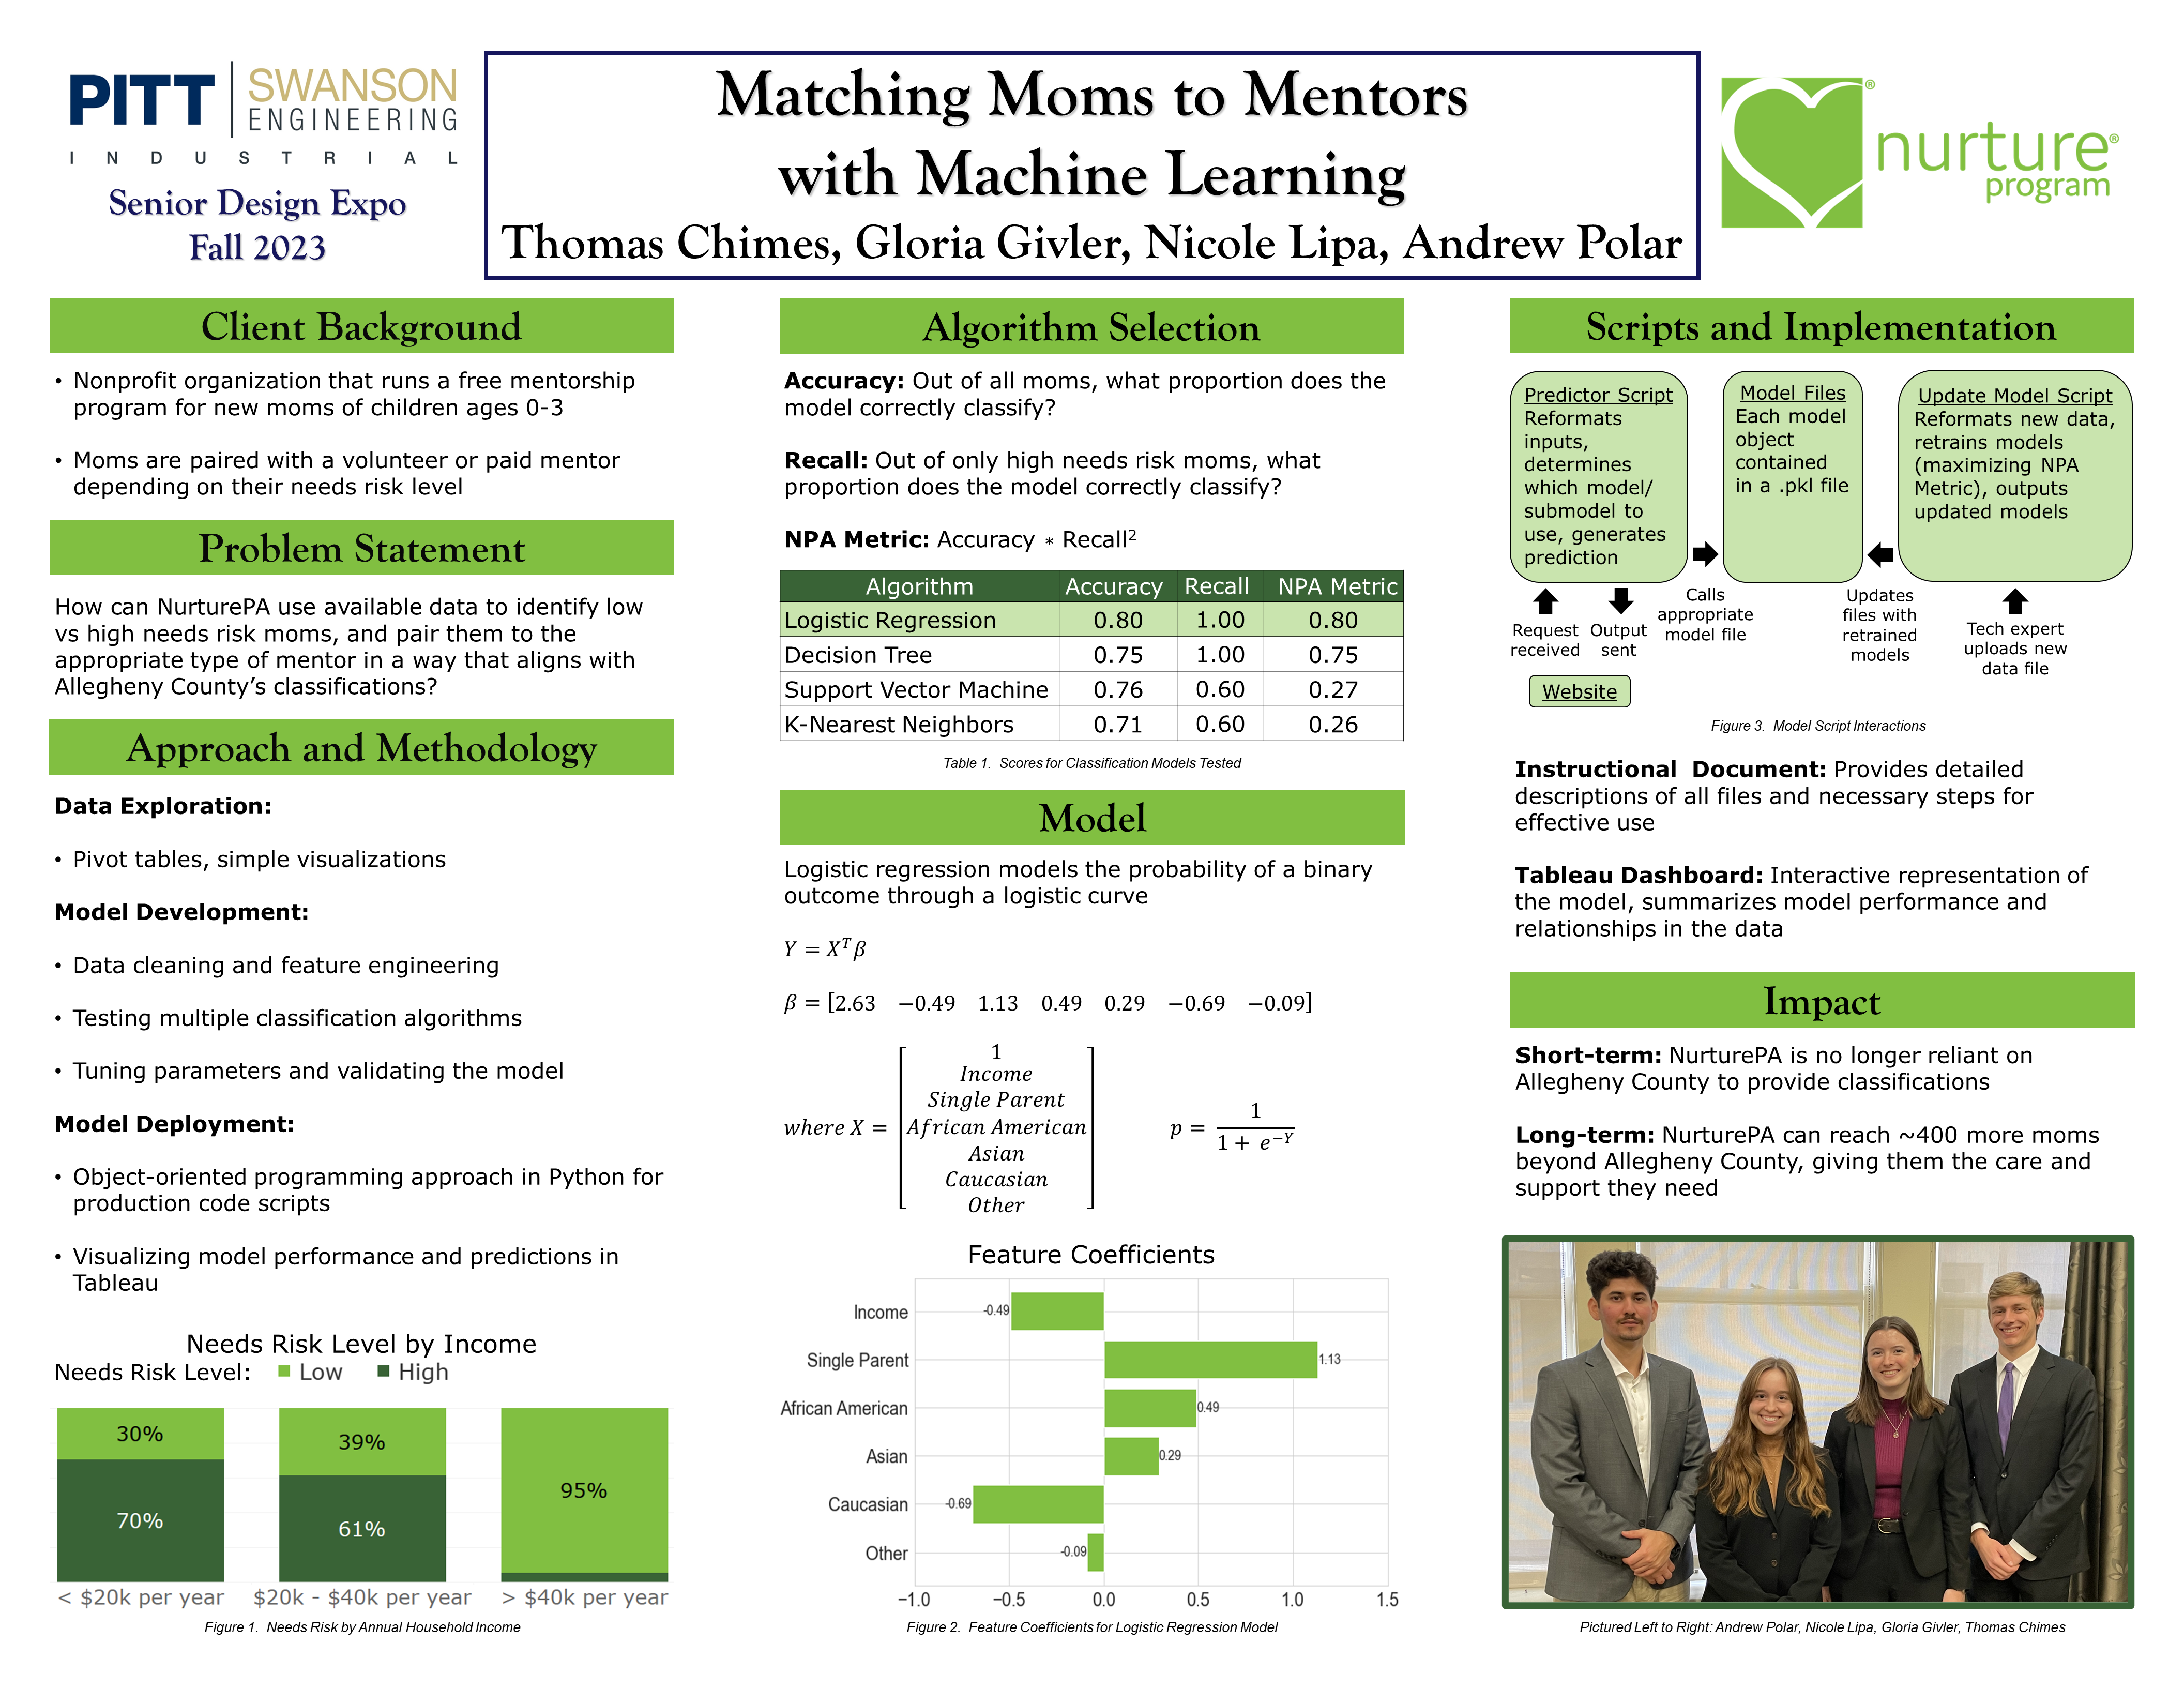 Matching Moms to Mentors with Machine Learning research poster that has visuals for the project summary